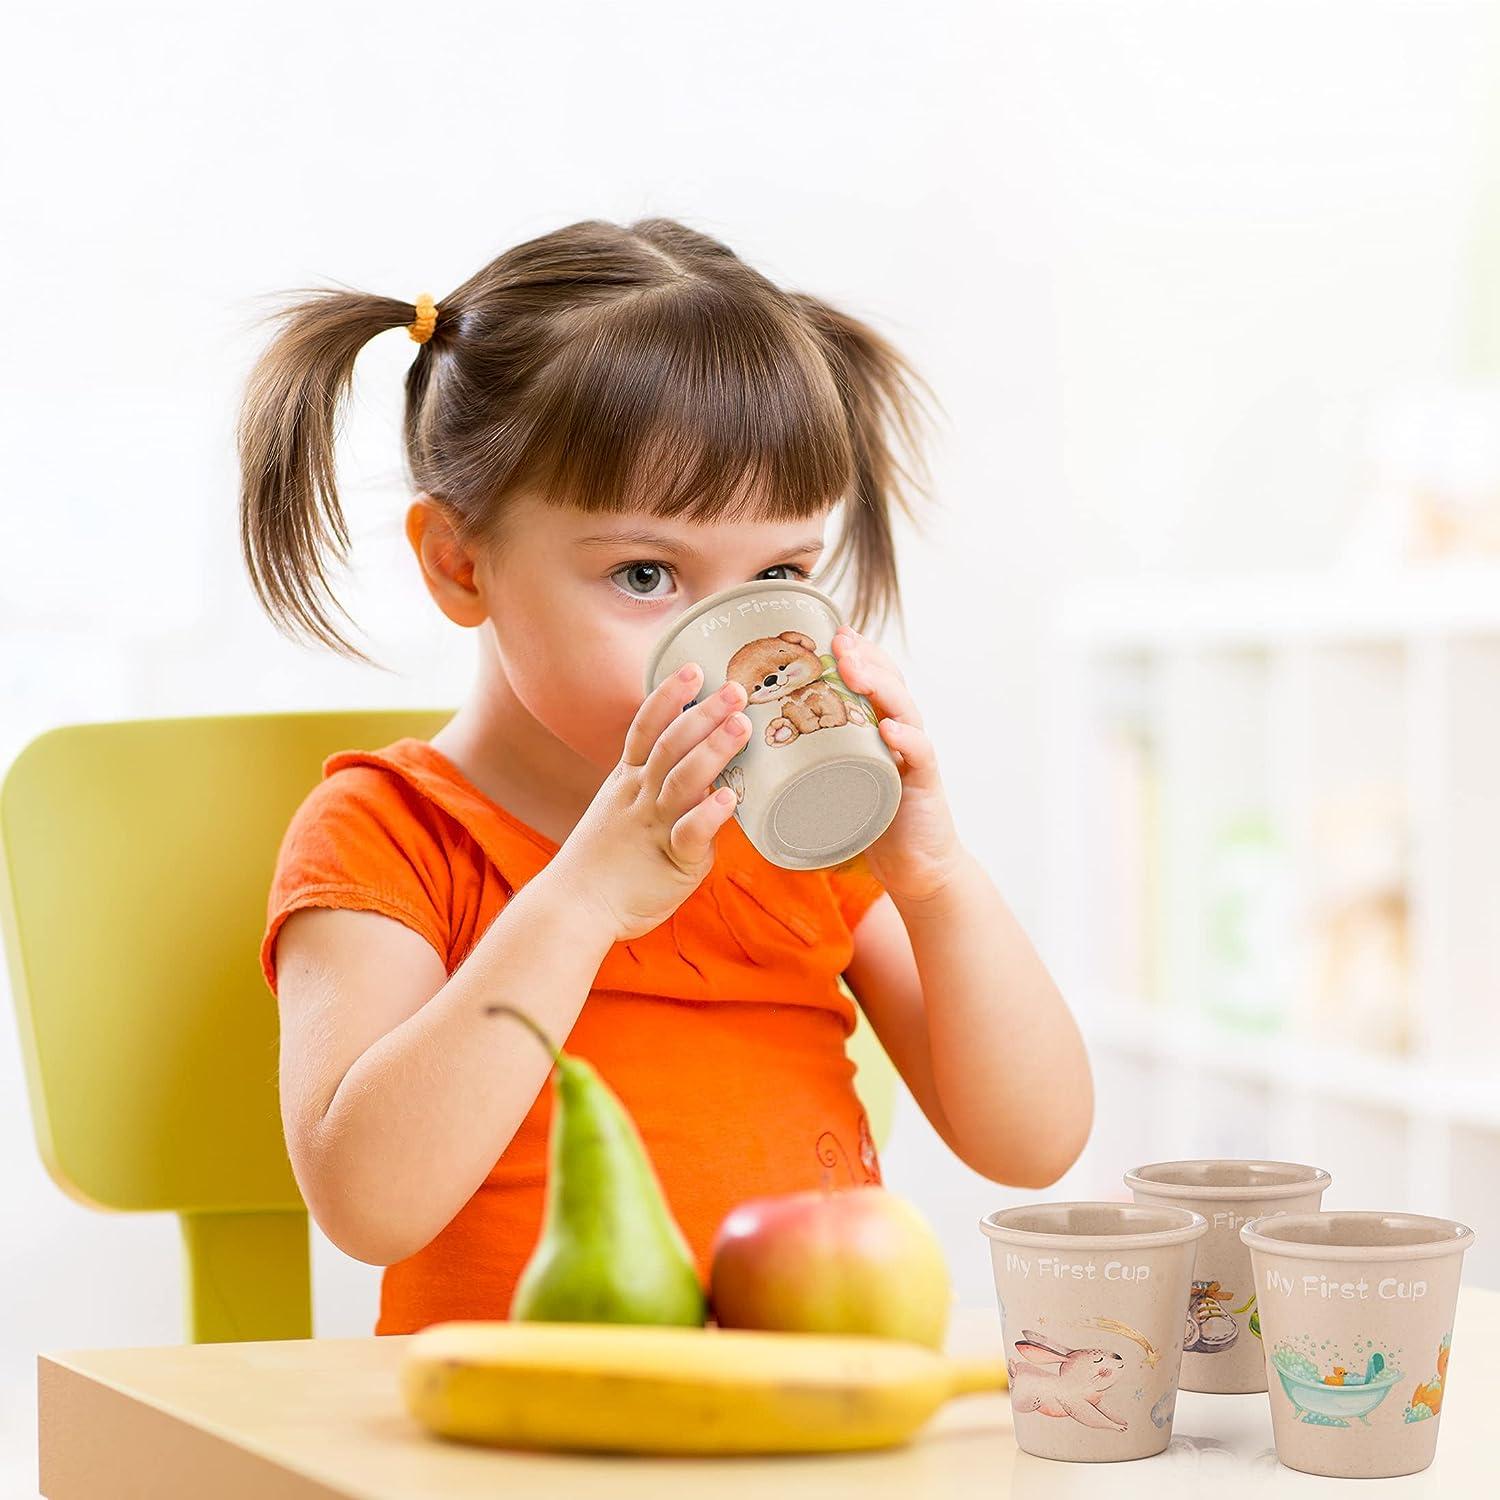 WeeSprout Bamboo Toddler Cups - 4 PC Set (10 fl oz) Organic & Non-Plastic Cup Pack for Toddlers Big Kids or Baby Natural 10 oz (Without Lids) Blue Ye